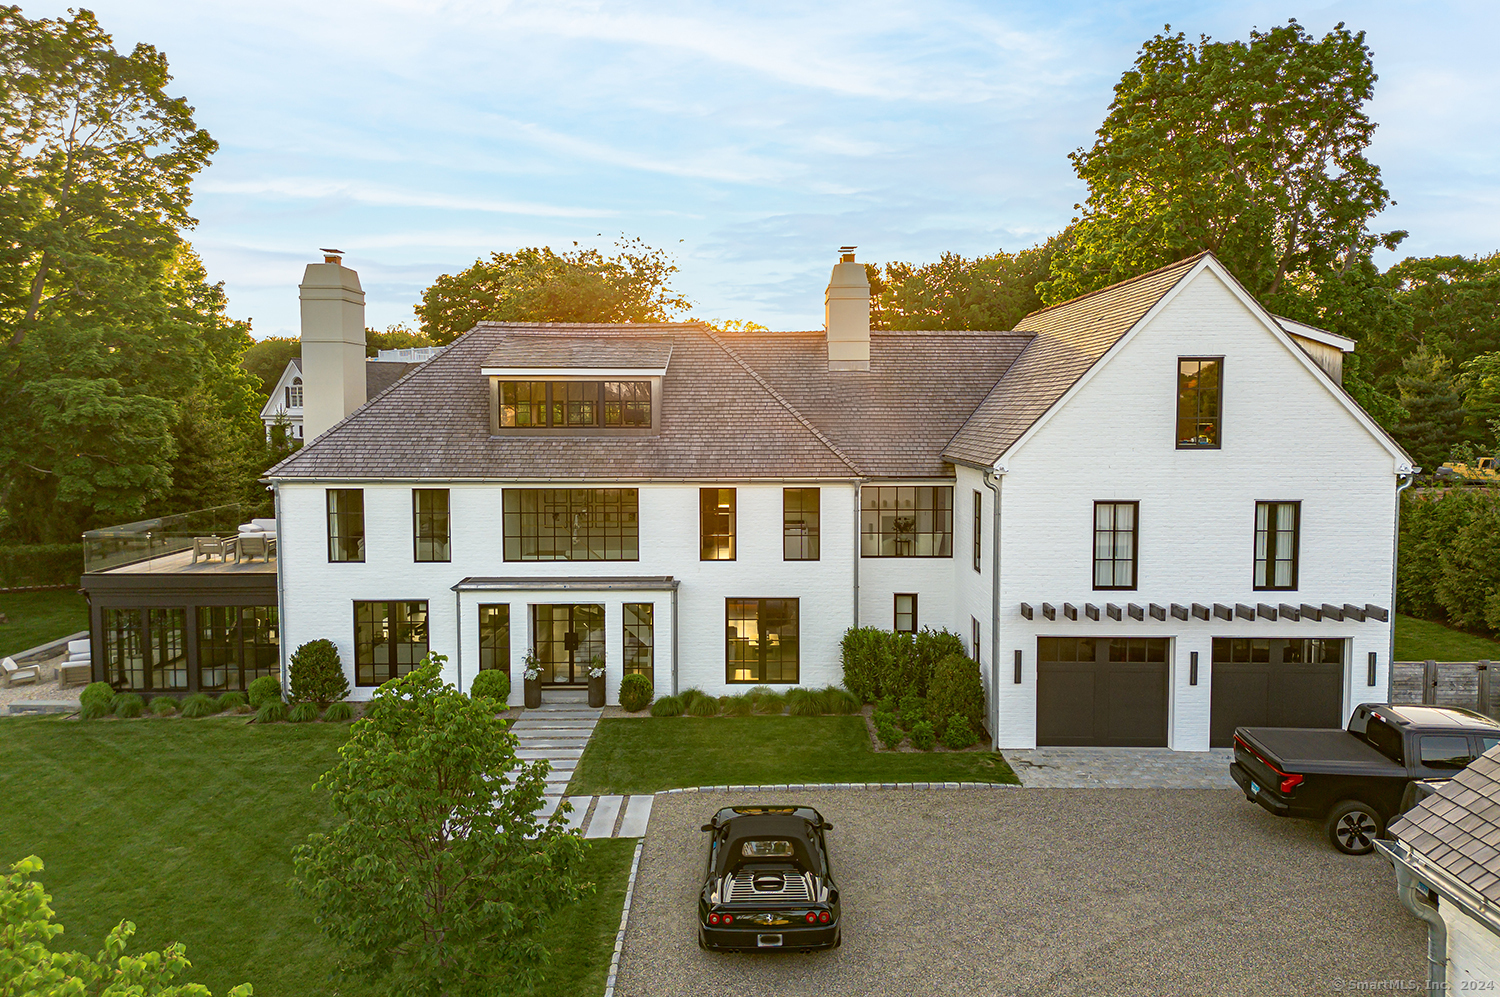 Property for Sale at 260 Willow Street, Fairfield, Connecticut - Bedrooms: 7 
Bathrooms: 7 
Rooms: 18  - $12,000,000